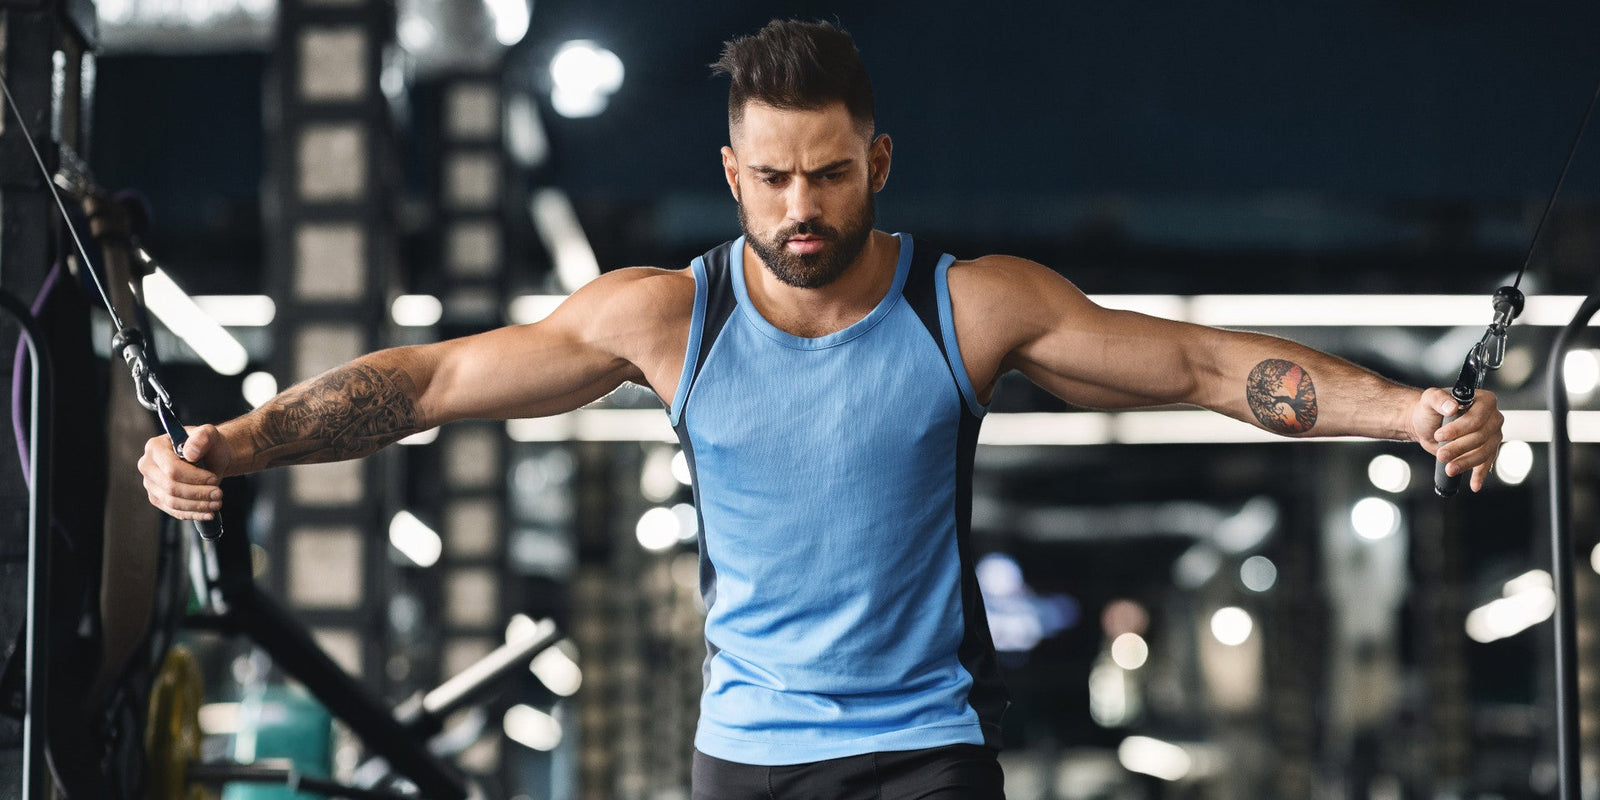 man gains muscle mass with high metabolism